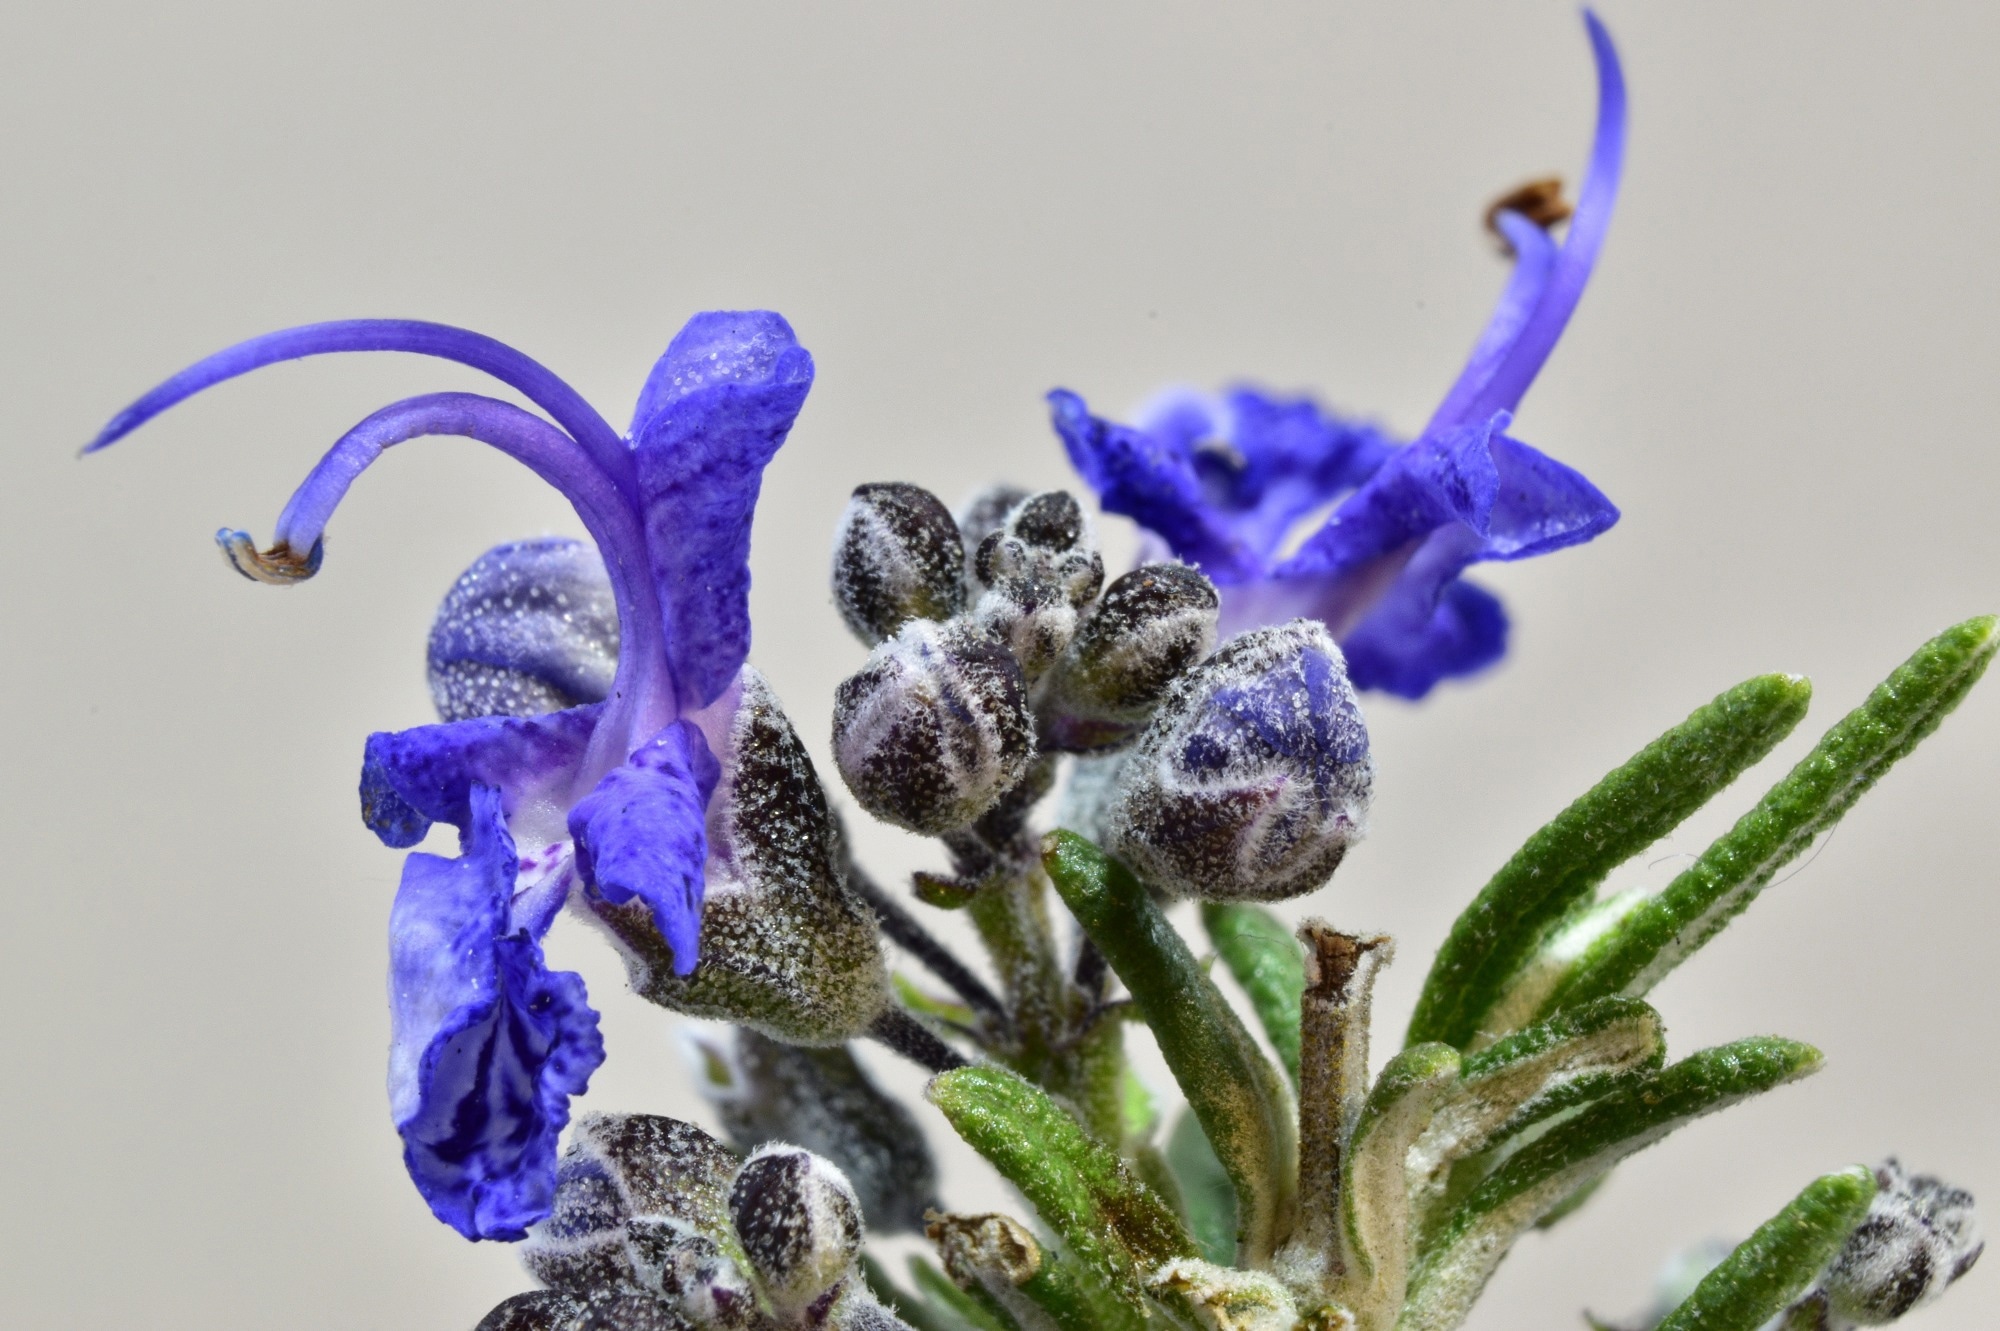 Study: Therapeutic Plants with Immunoregulatory Activity and Their Applications: A Scientific Vision of Traditional Medicine in Times of COVID-19. Image Credit: cfsmady / Shutterstock